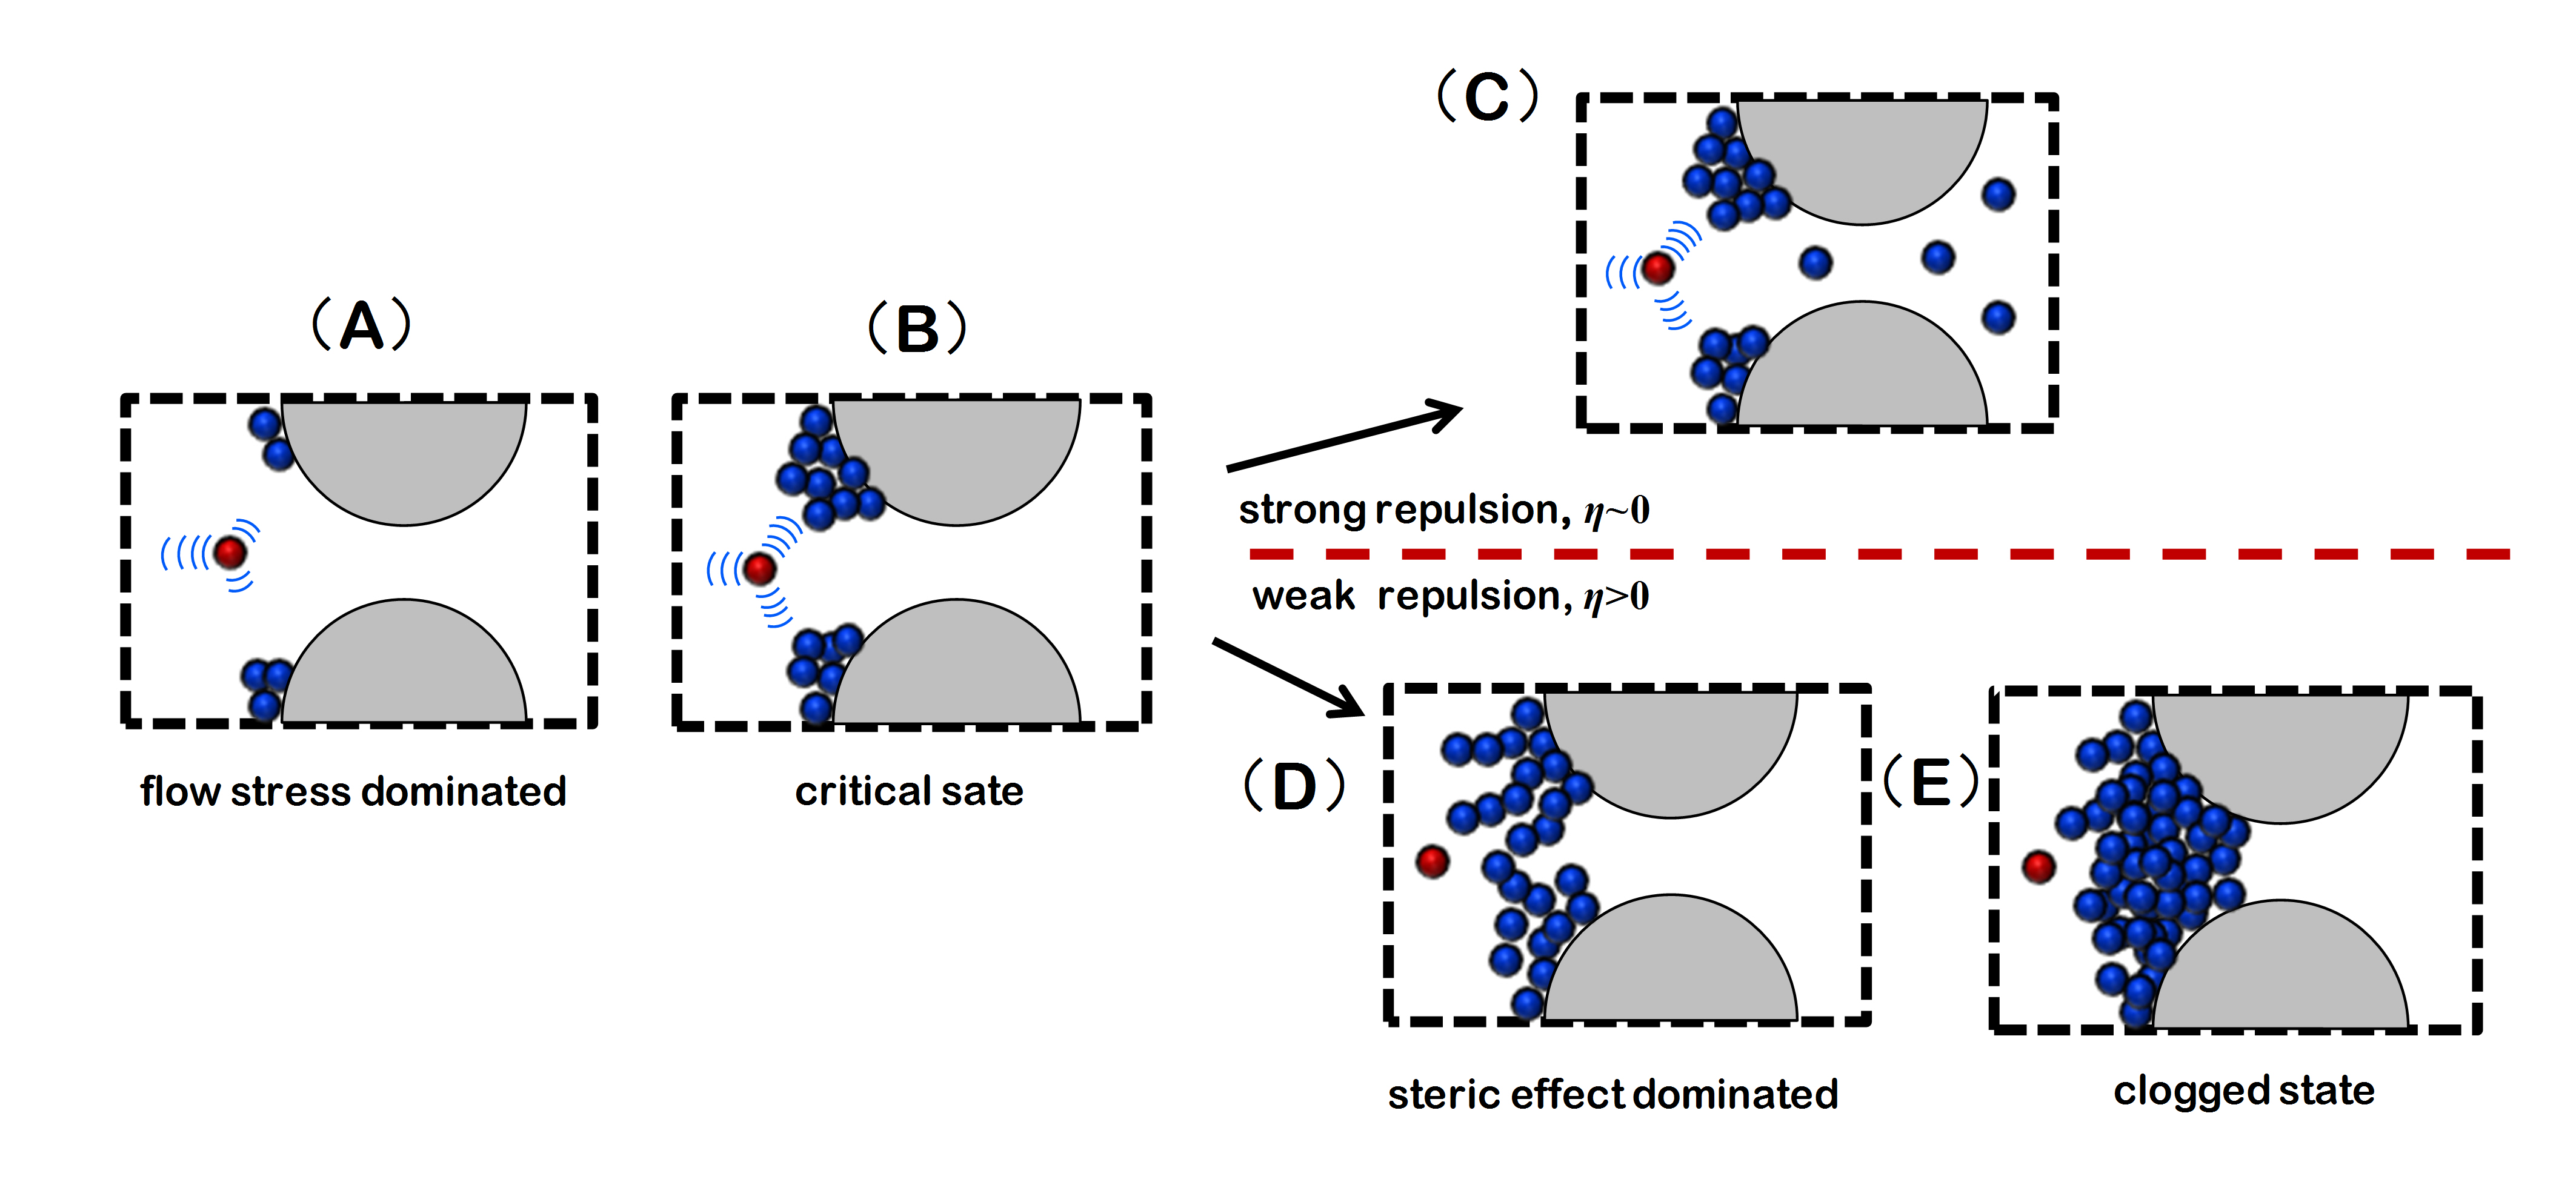 The mechanism of pore clogging of micro-particles during microfiltration in the presence of long-range electrostatic repulsion